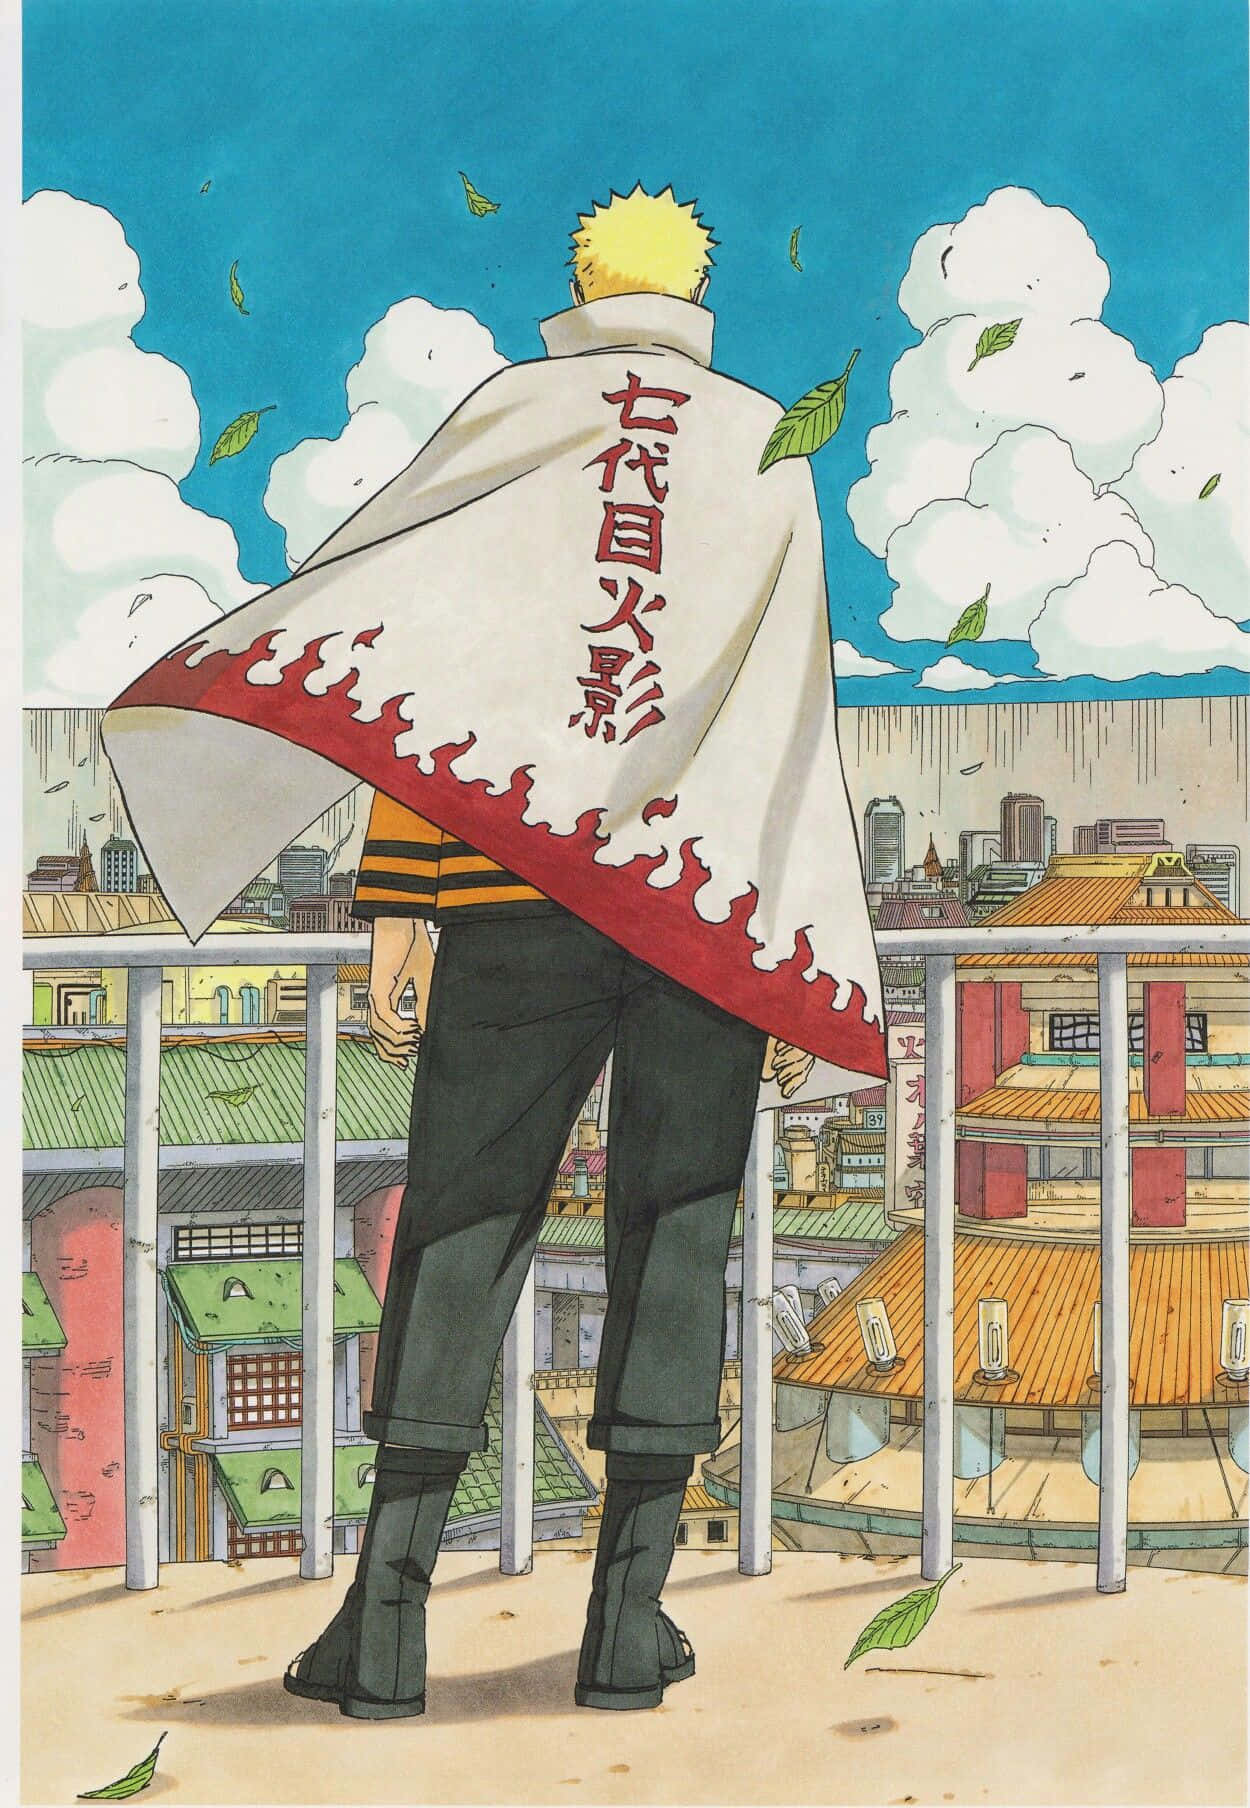 Get ready to experience the exciting world of Naruto Shippuden on your iPhone Wallpaper